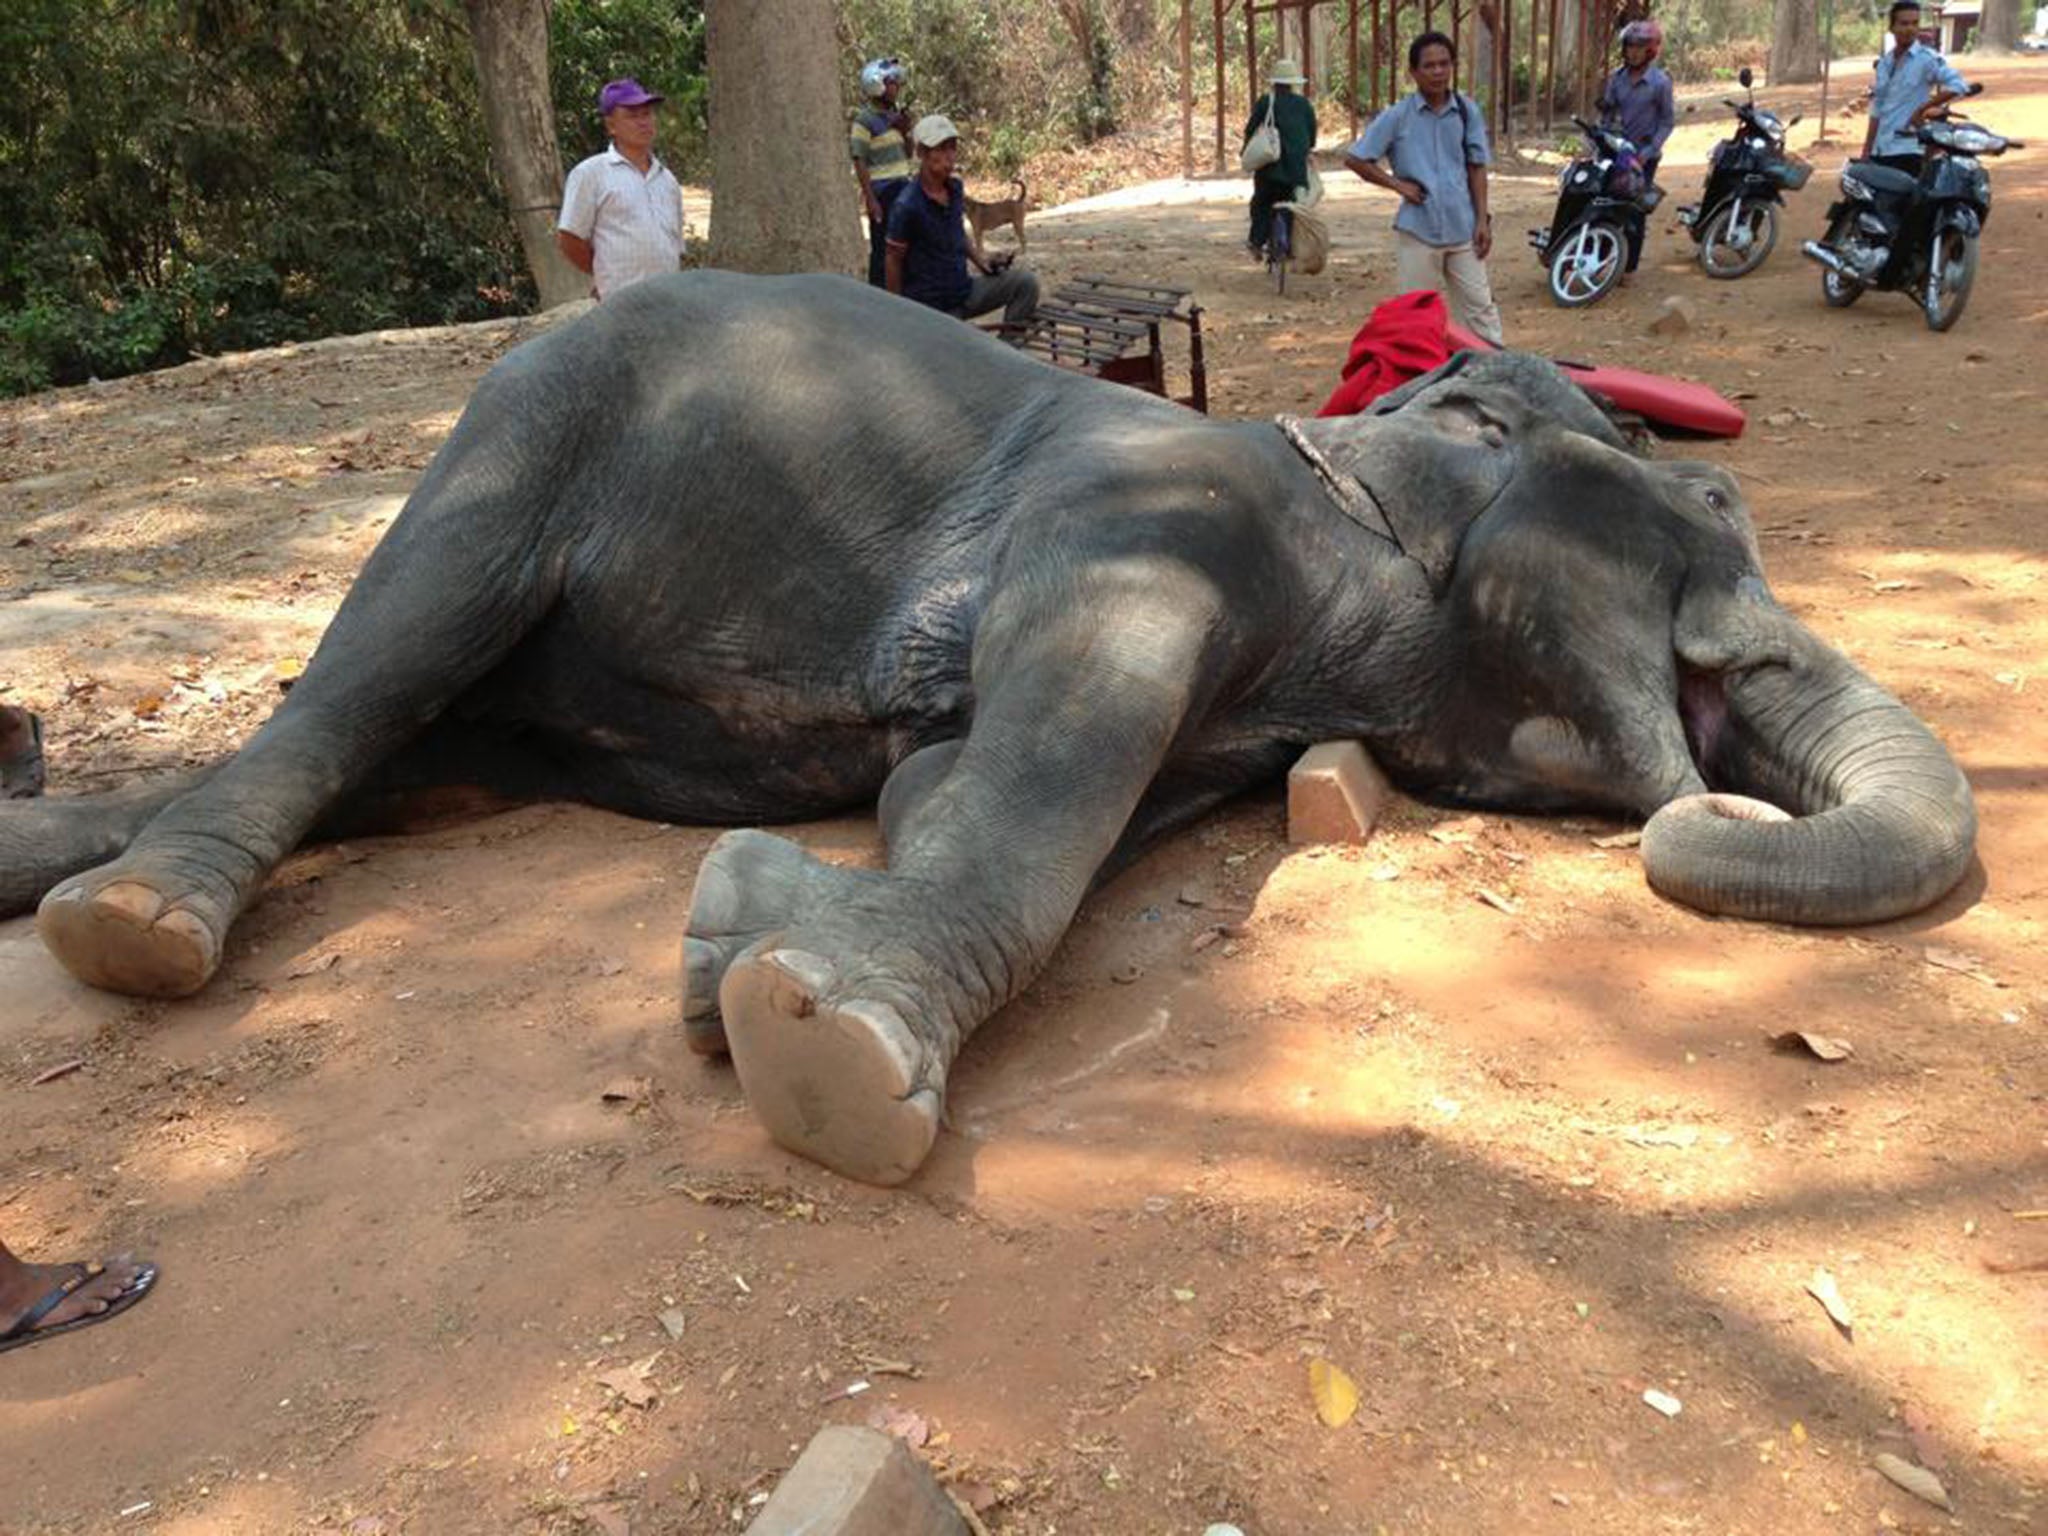 Sambo the elephant was thought to be between 40 and 45 years-old